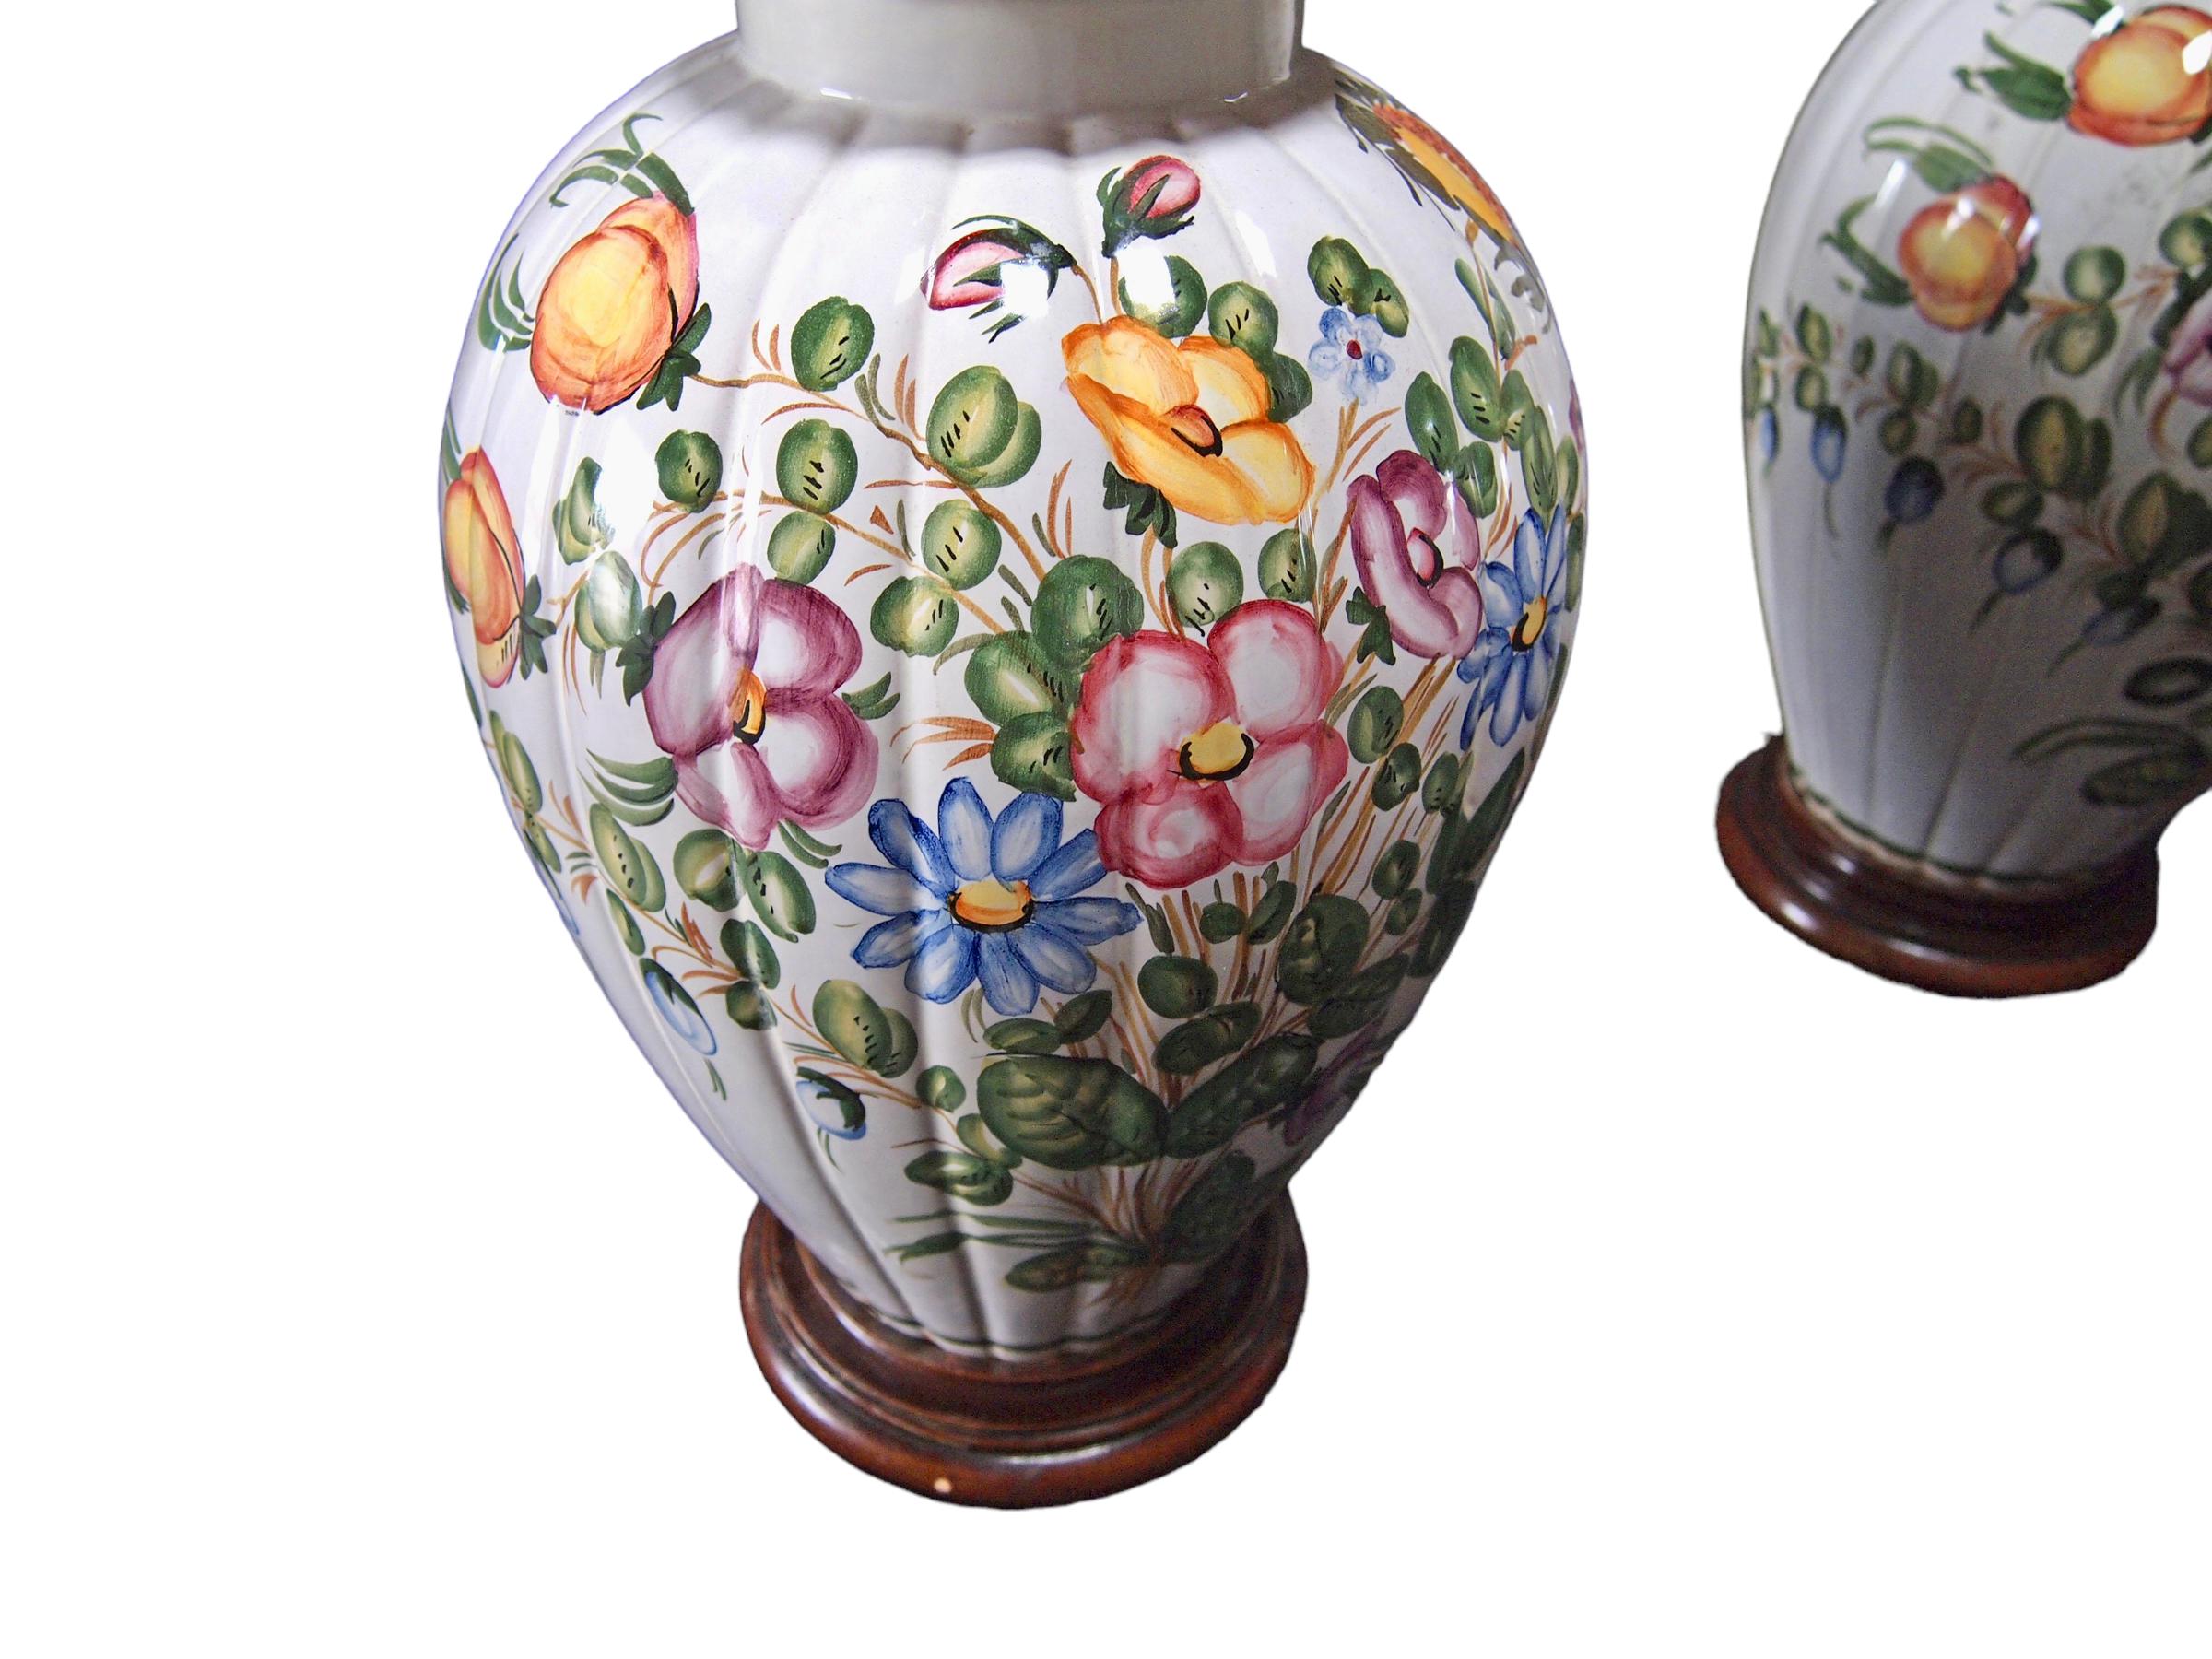 Hollywood Regency Pair of Large Floral Decorated Lamps Lamps by Marbro Lamp Co. For Sale